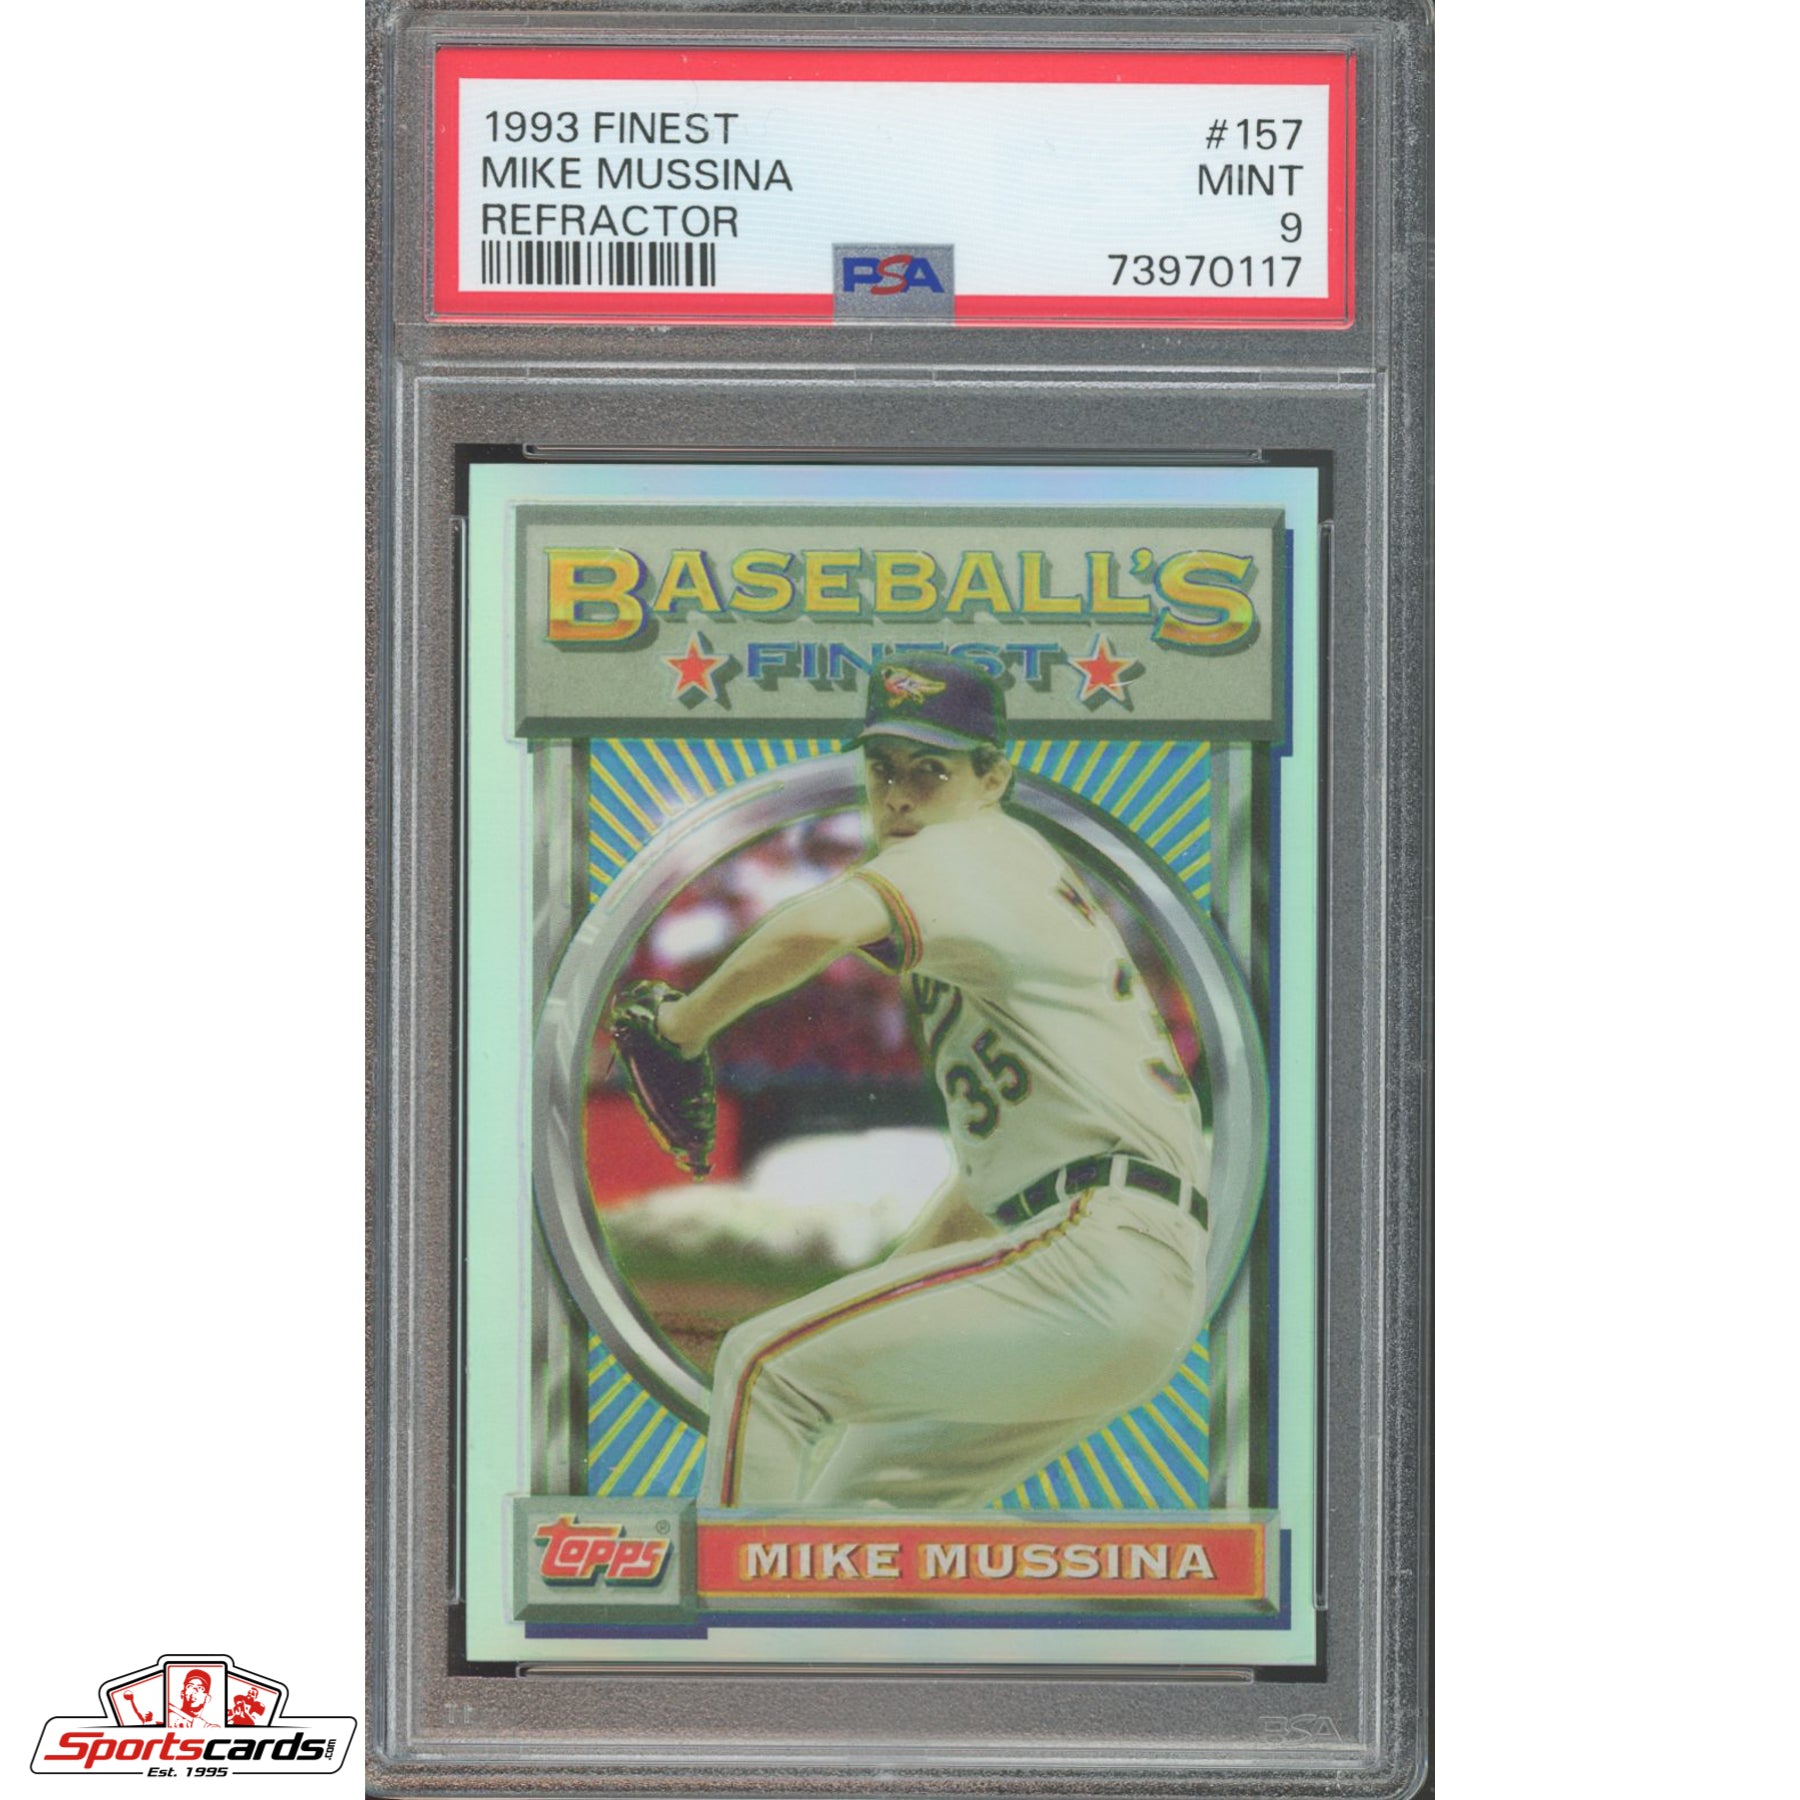 1993 Finest Mike Mussina Refractor #157 PSA 9